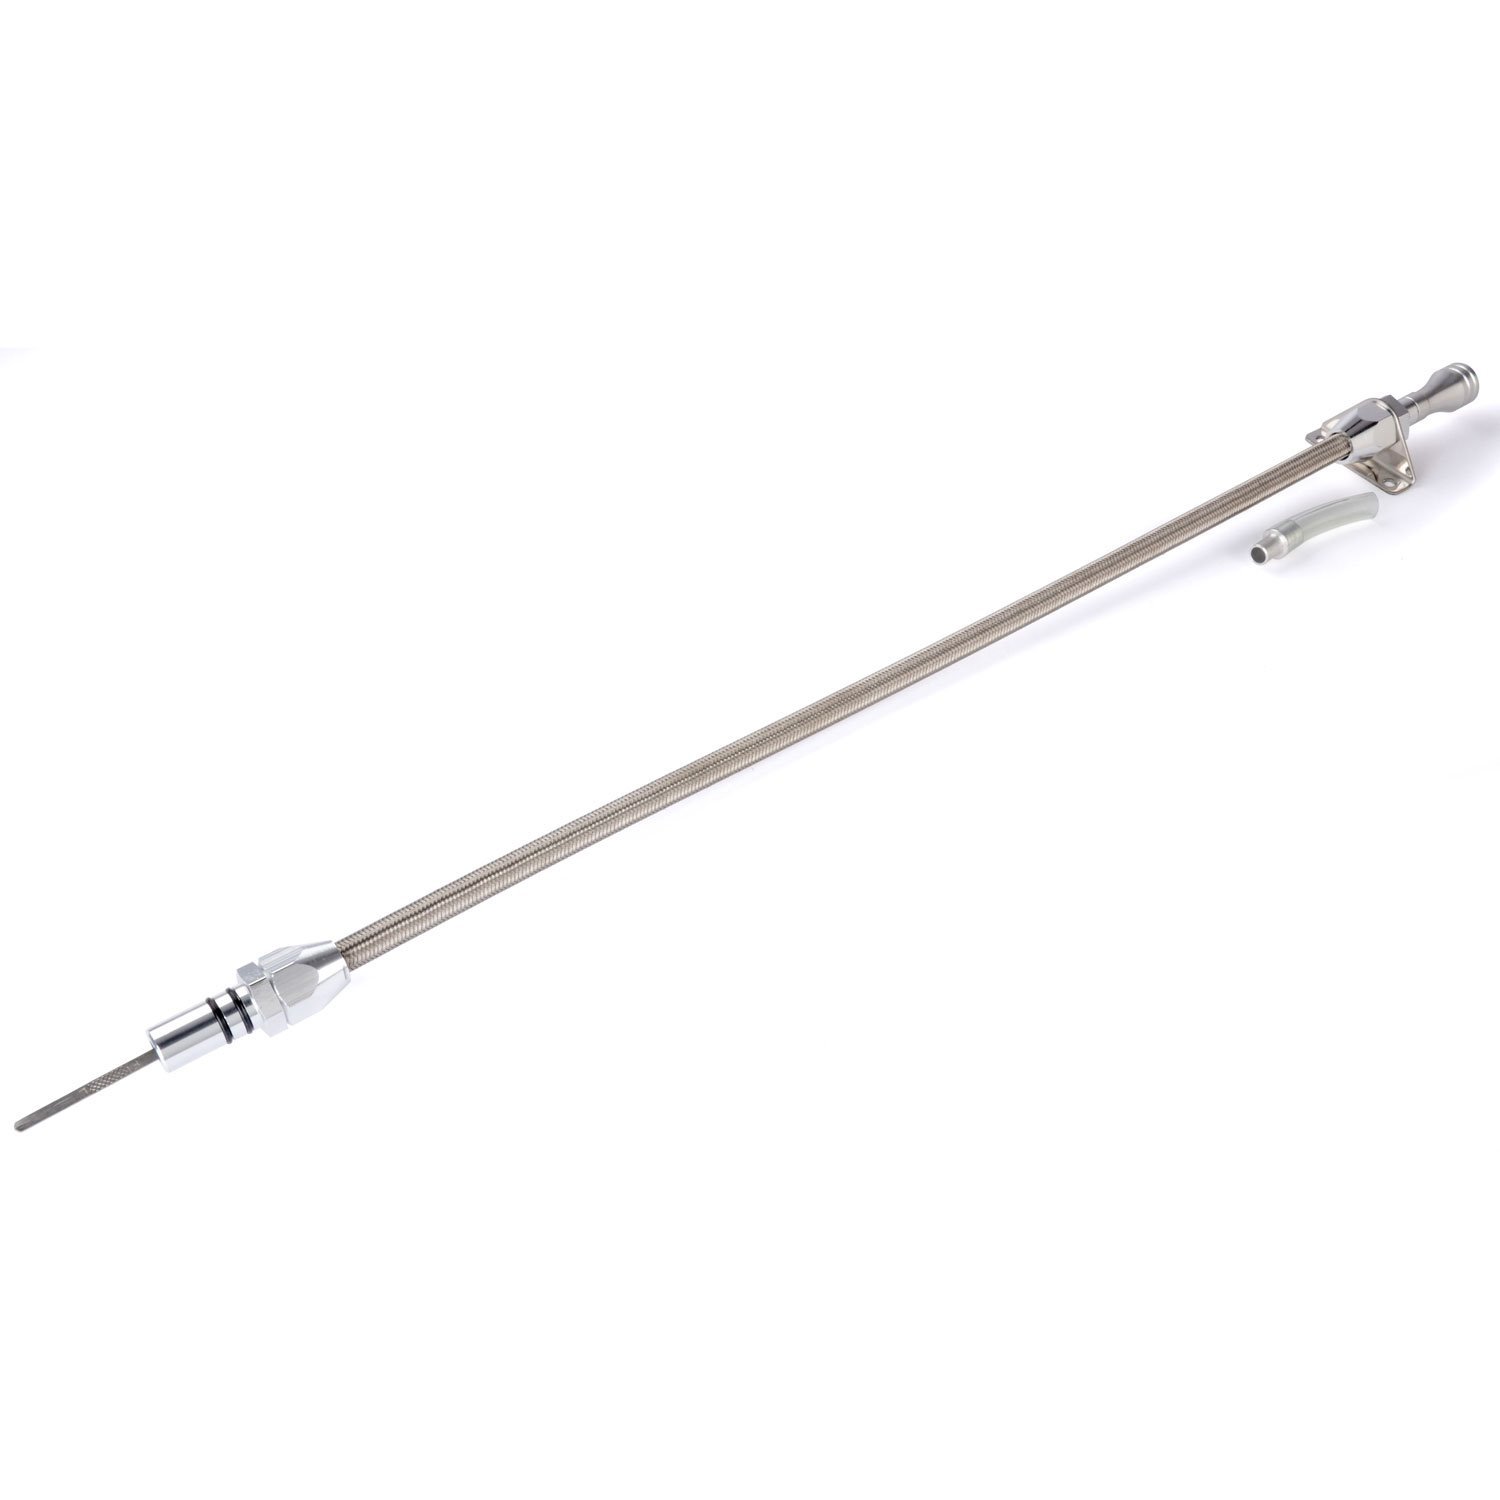 Flexible Braided Transmission Dipstick for Ford C6 [Polished]